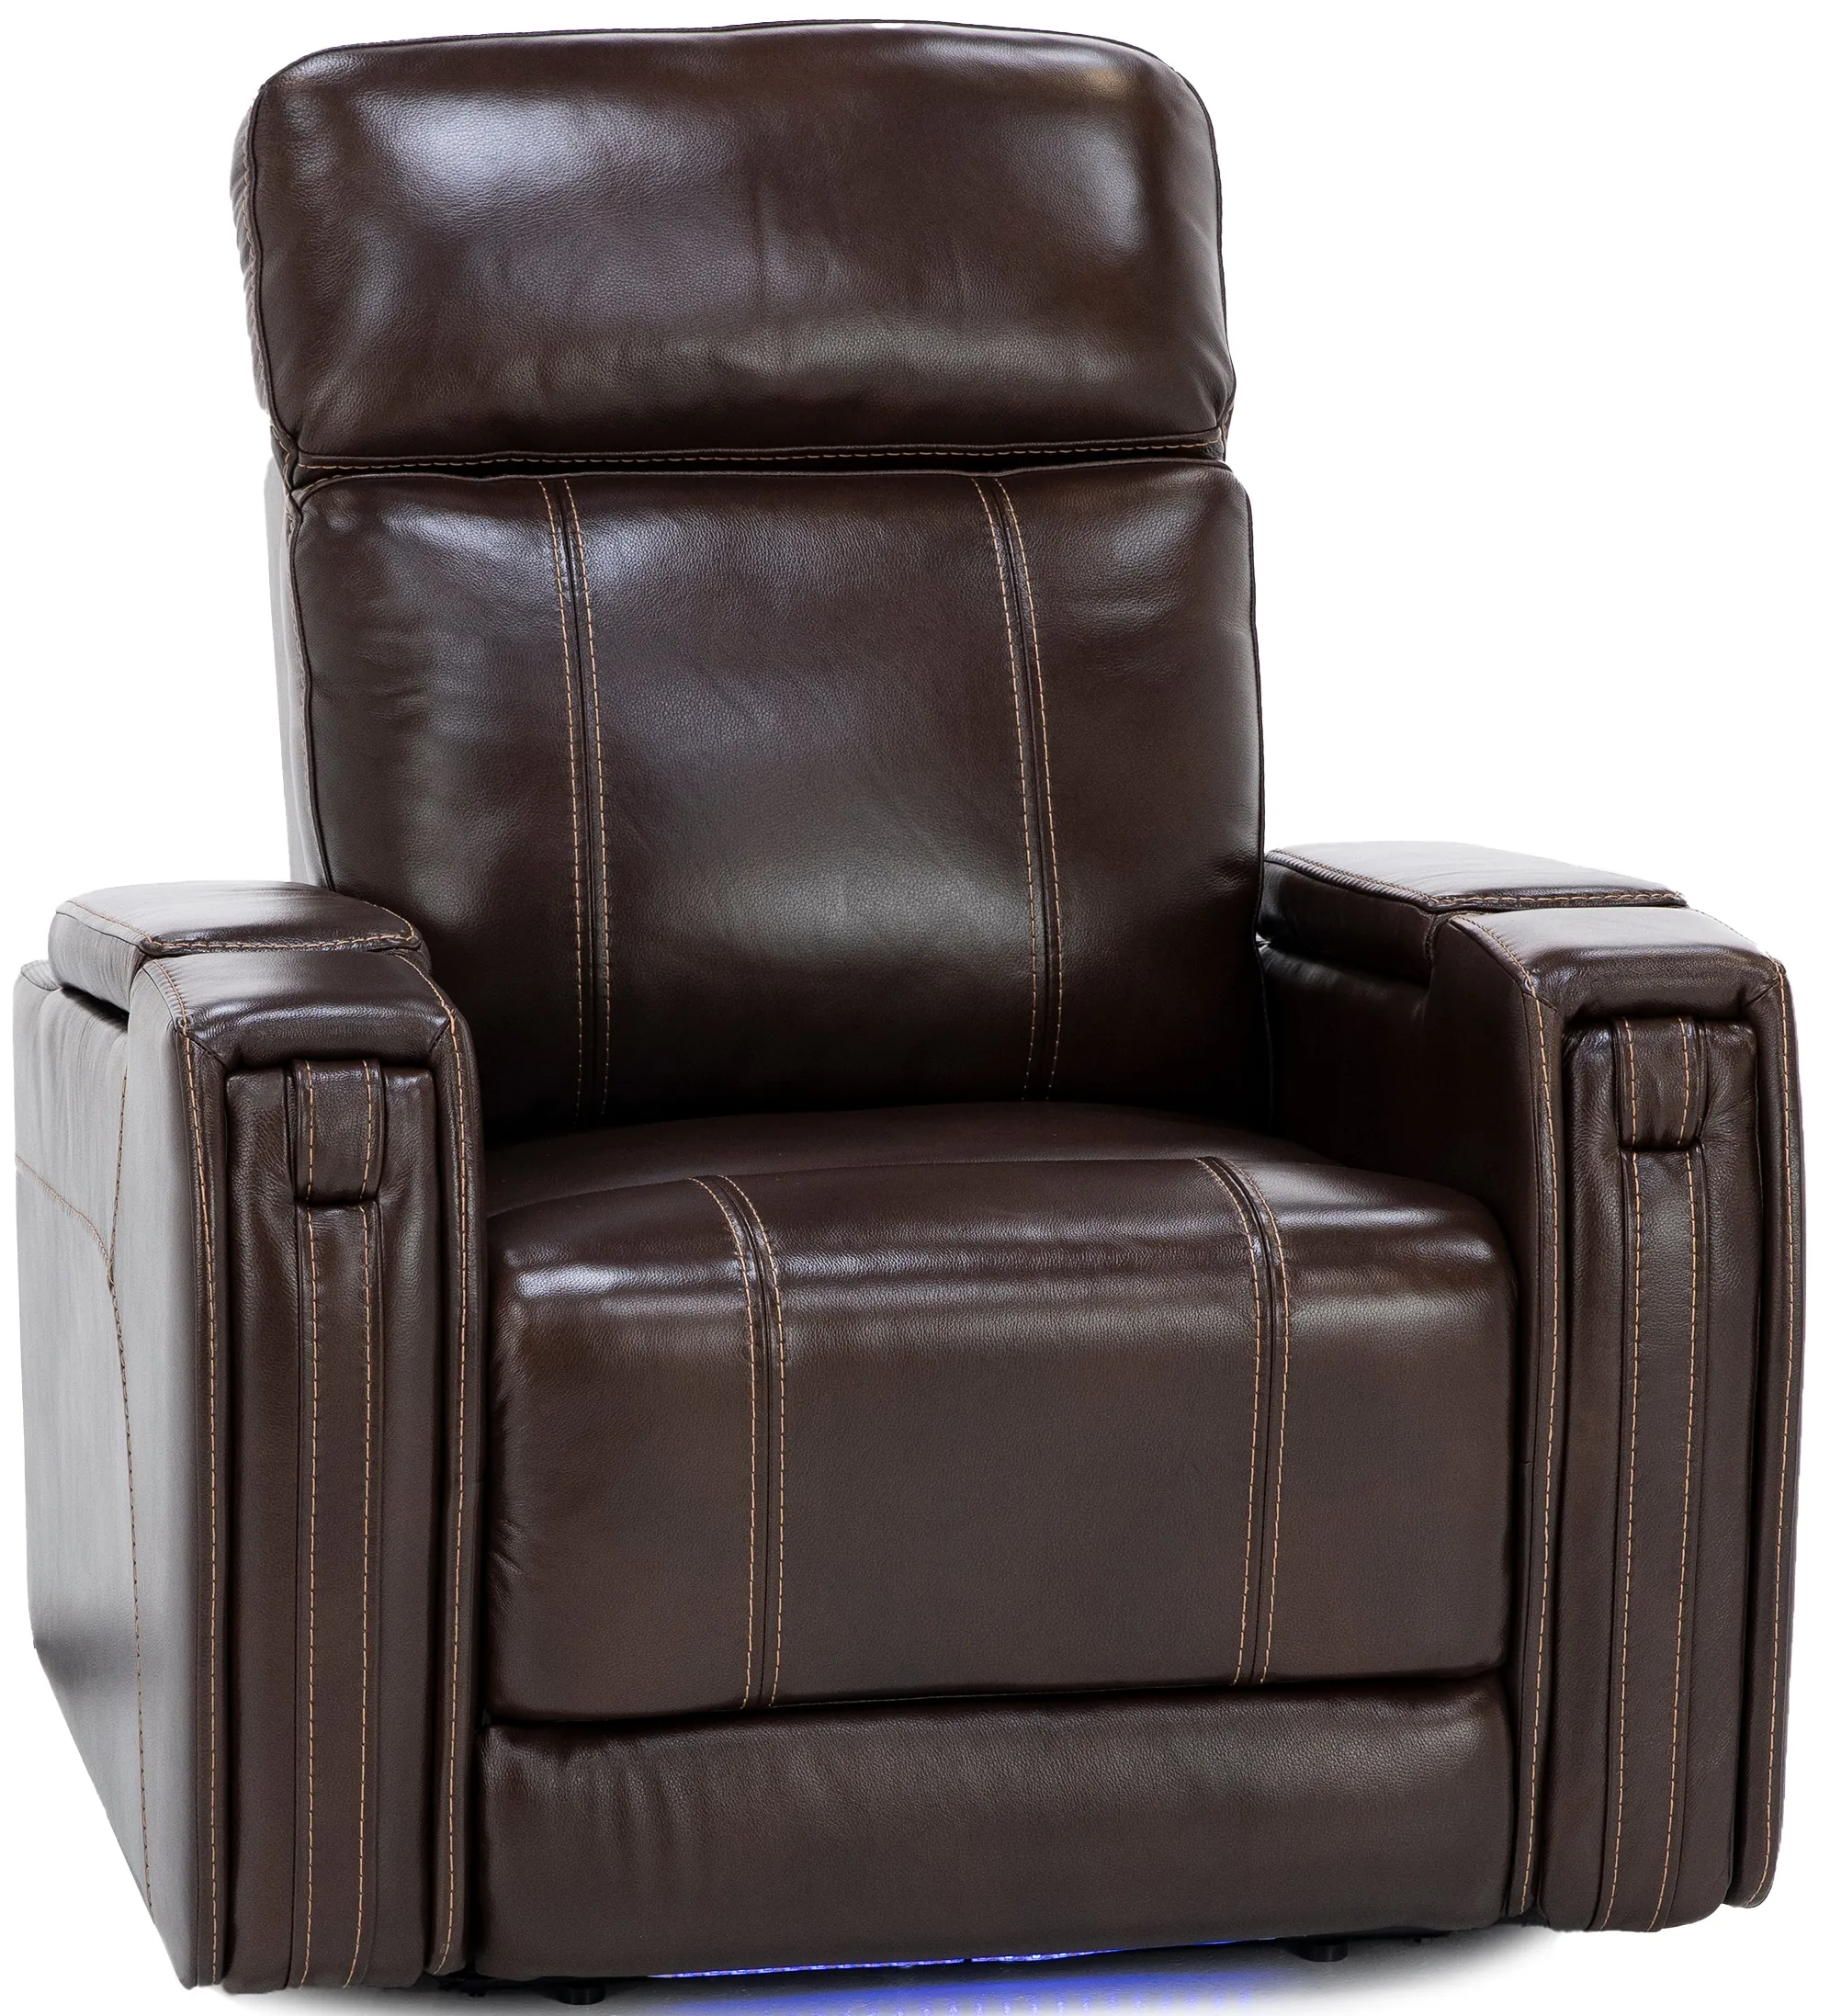 Margot Leather Fully Loaded Multi Media Home Theater Recliner With Hidden Cupholders in Coffee